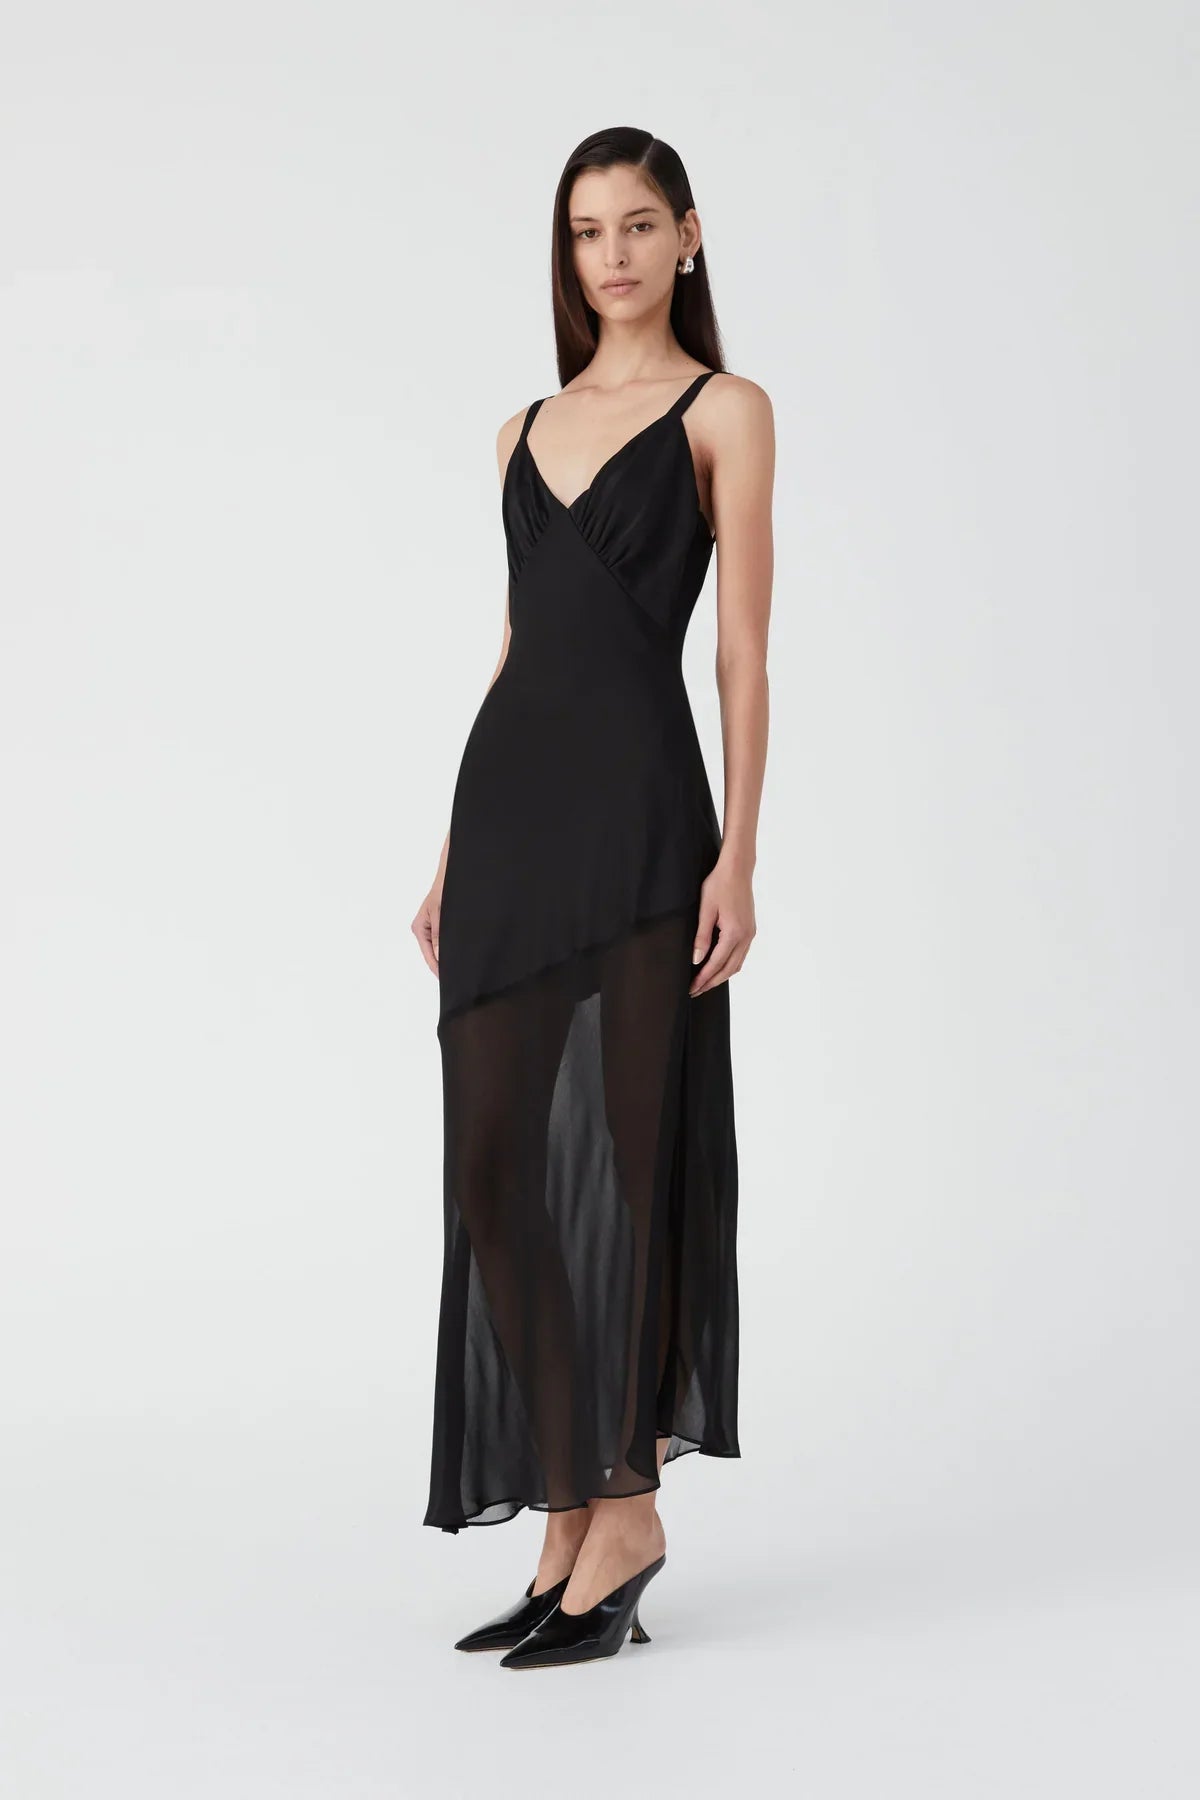 Msh Camille Maxi Dress